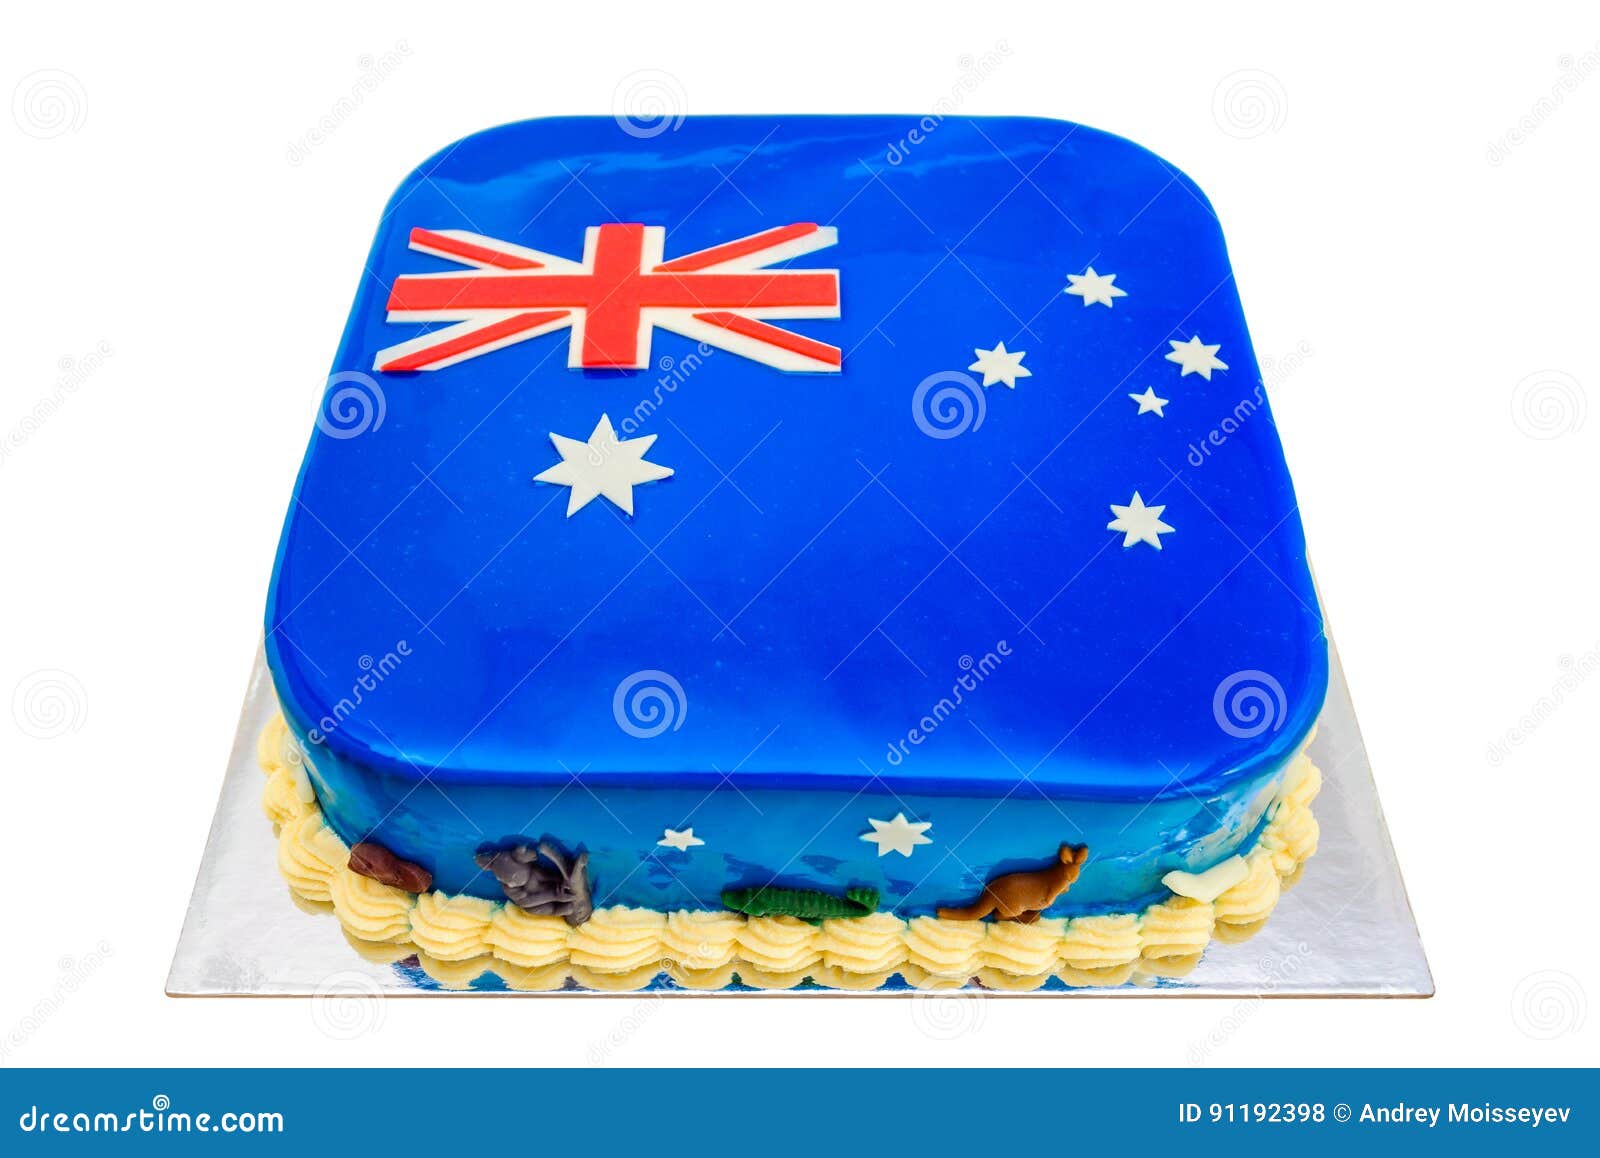 1pc Cake Decorating Lace Silicone Mold for Sale Australia| New Collection  Online| SHEIN Australia